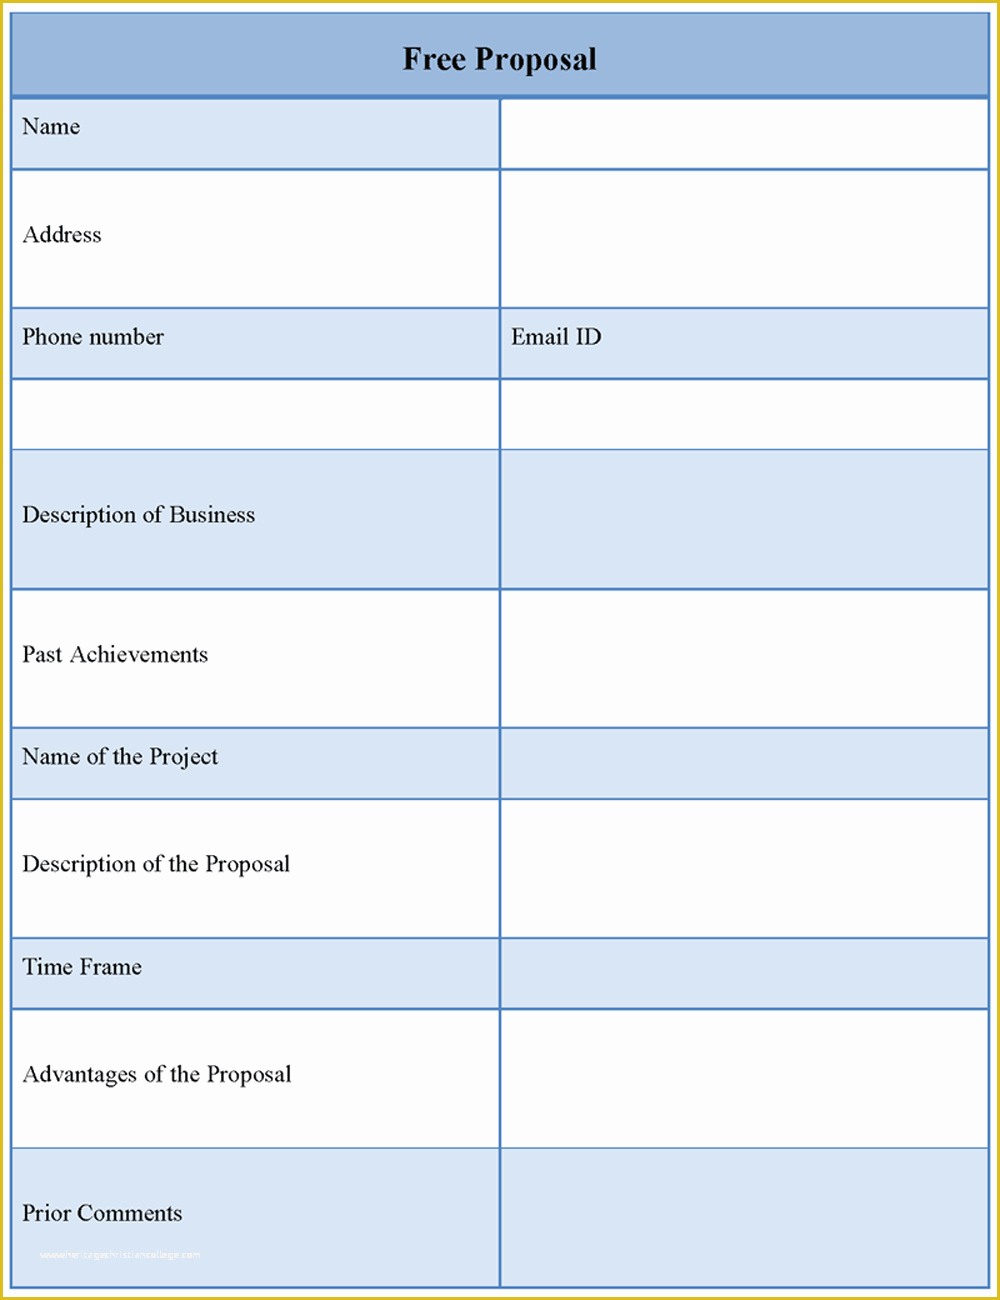 Free Proposal Template Word Of Free Proposal Template